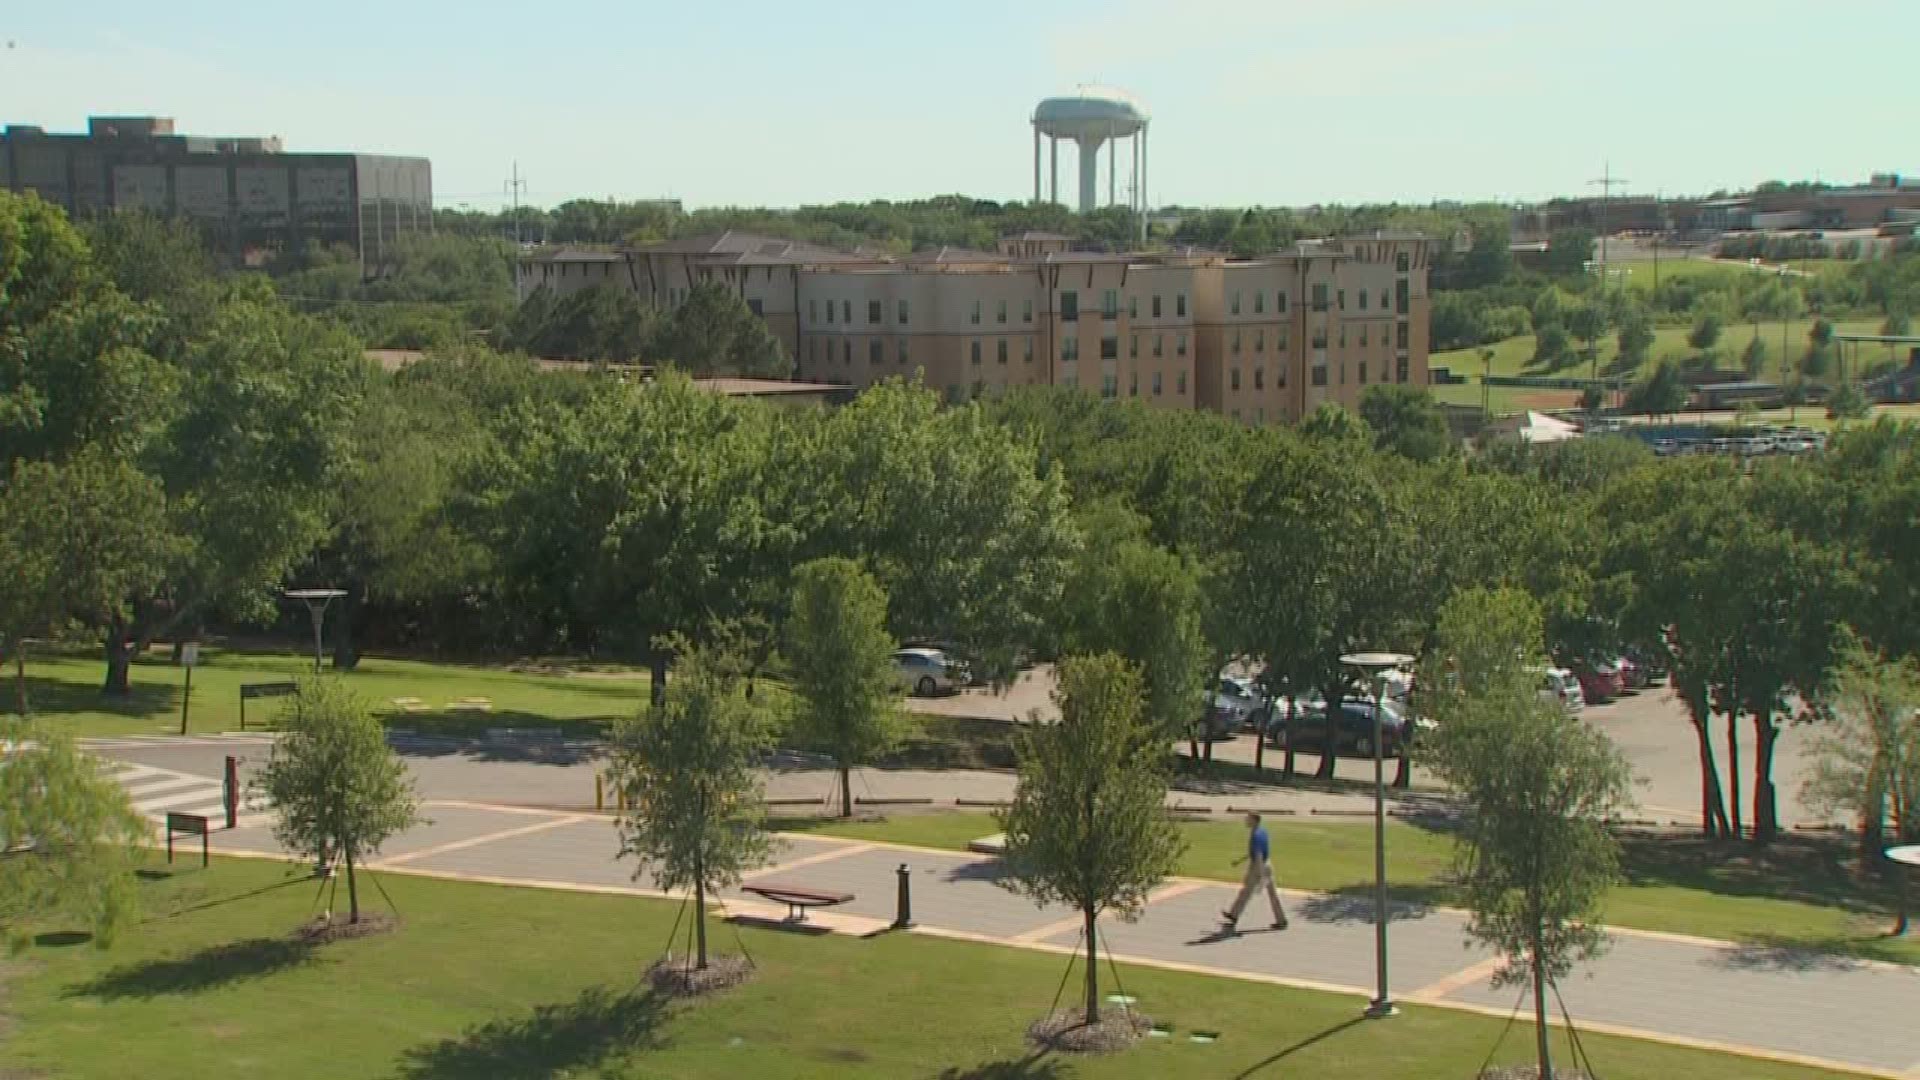 University of Dallas faces financial challenges